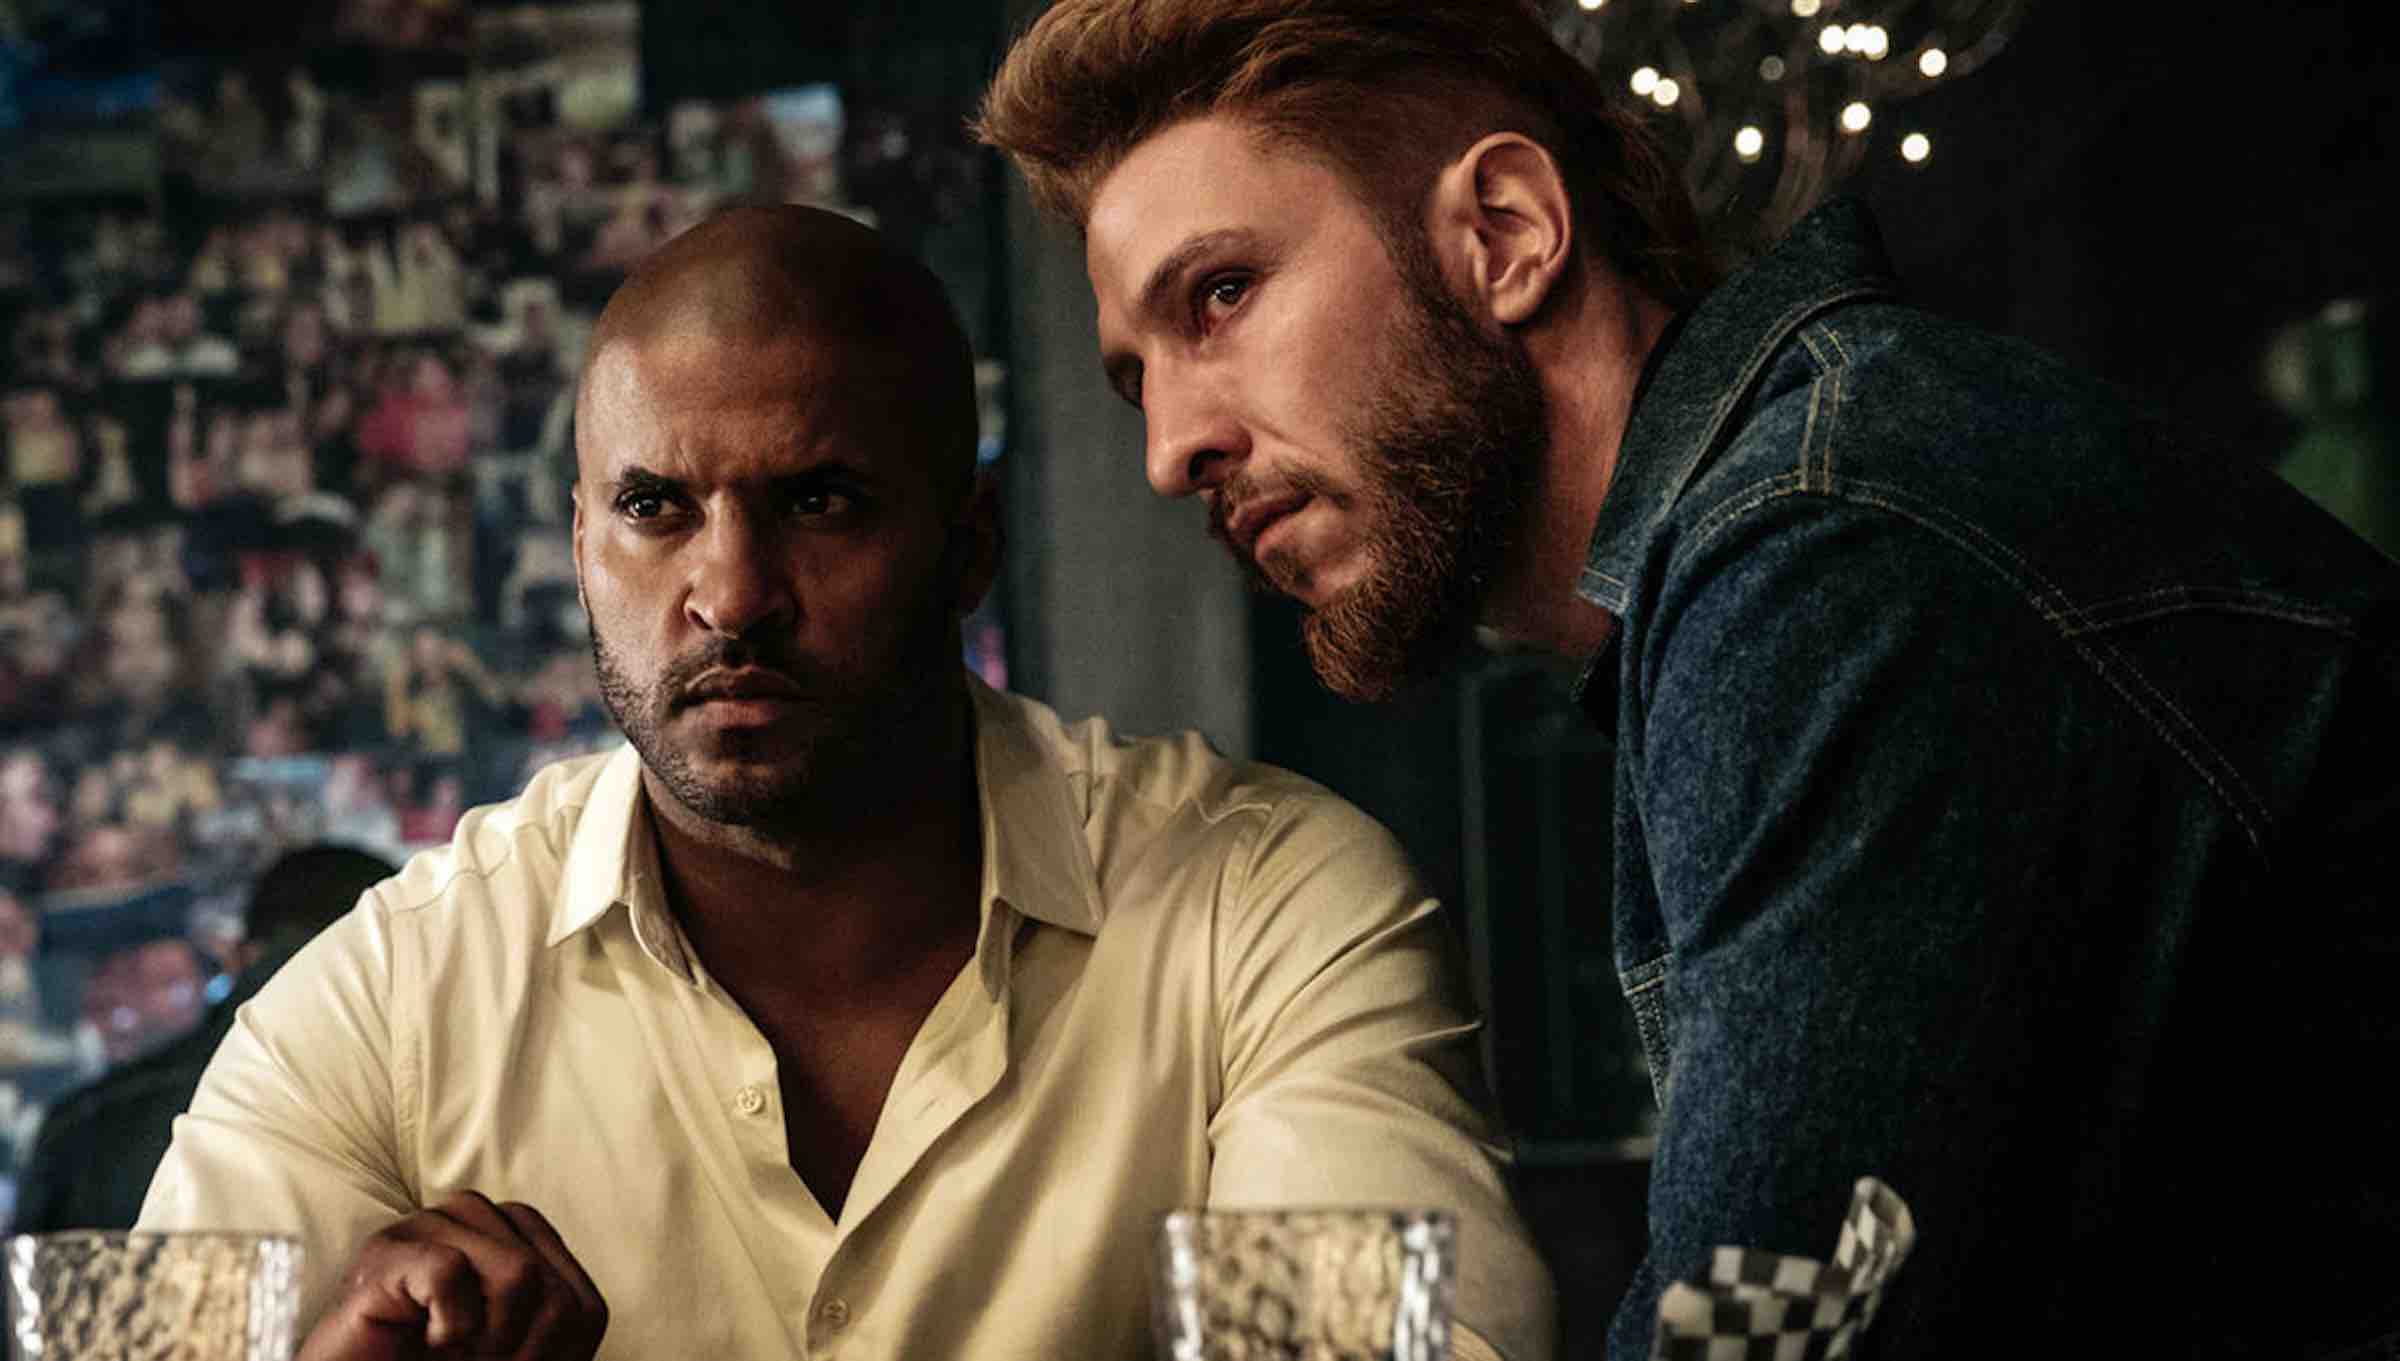 Starz's 'American Gods' has some major behind the scenes drama happening. Here's the story on accusations of racism, firings, and the show's third season.